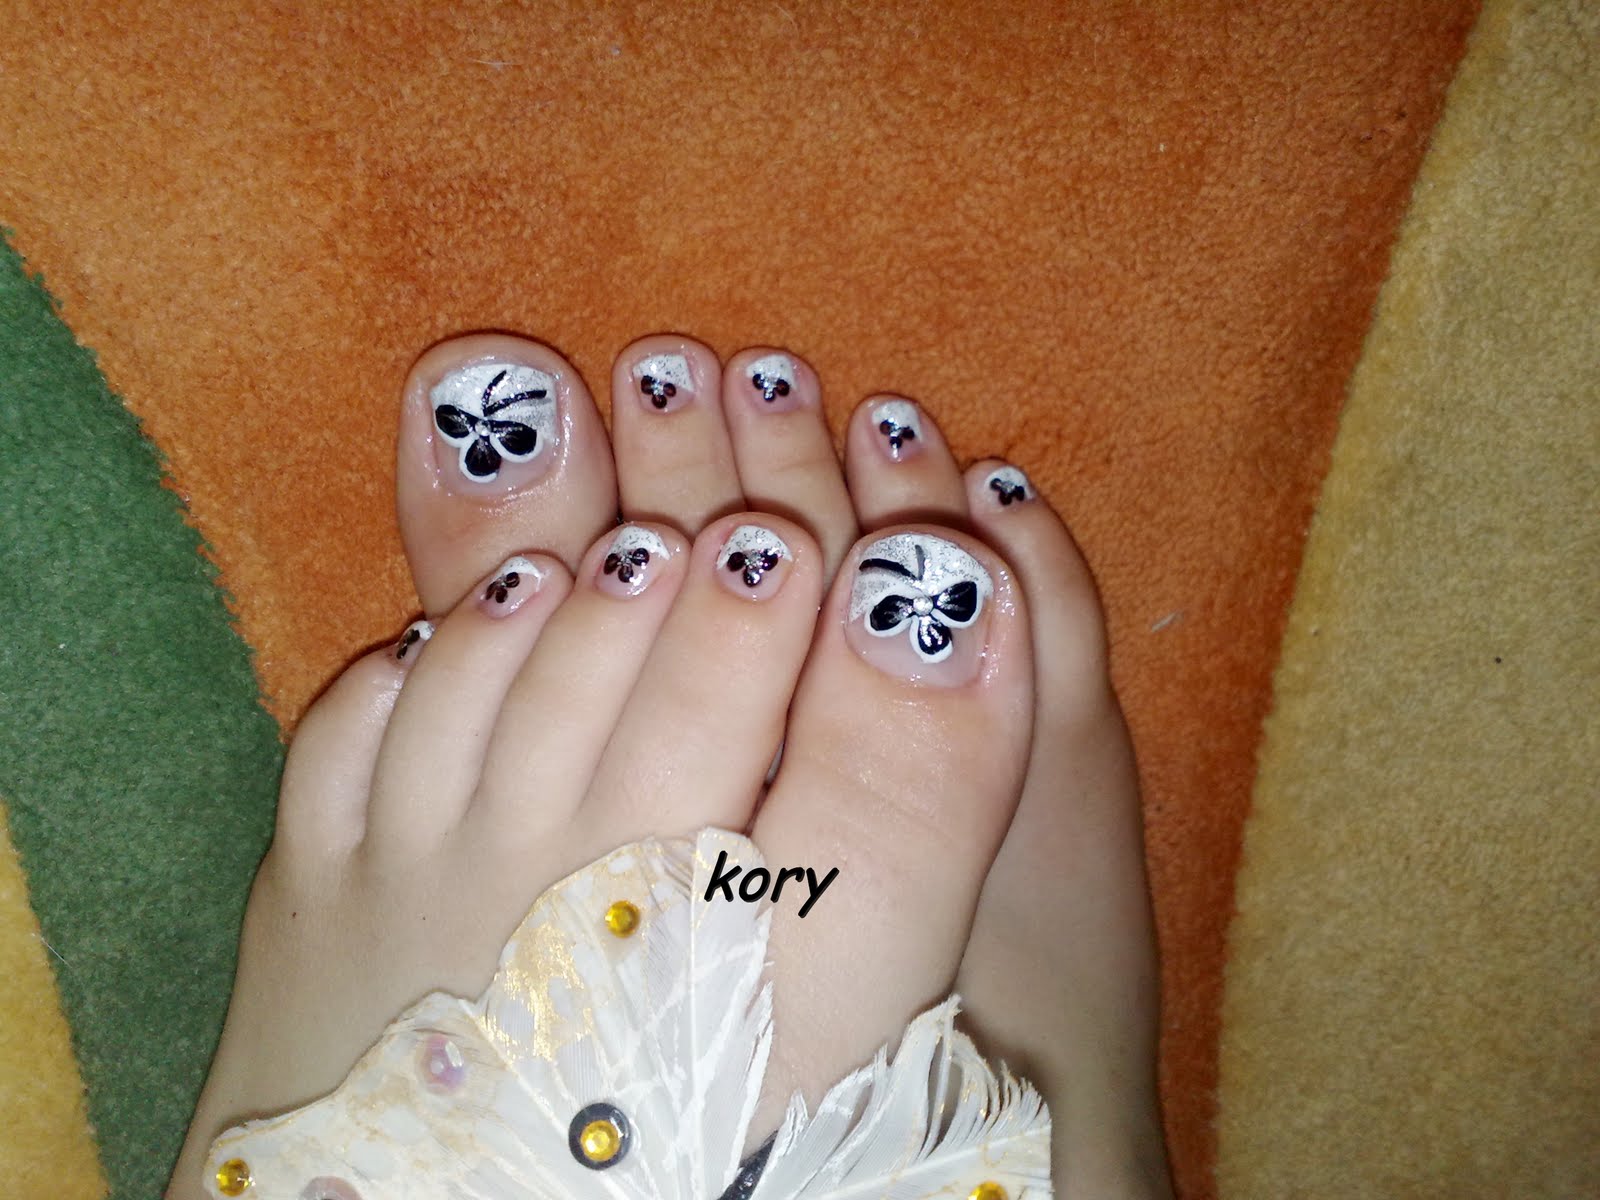 My Nails: my pedicure